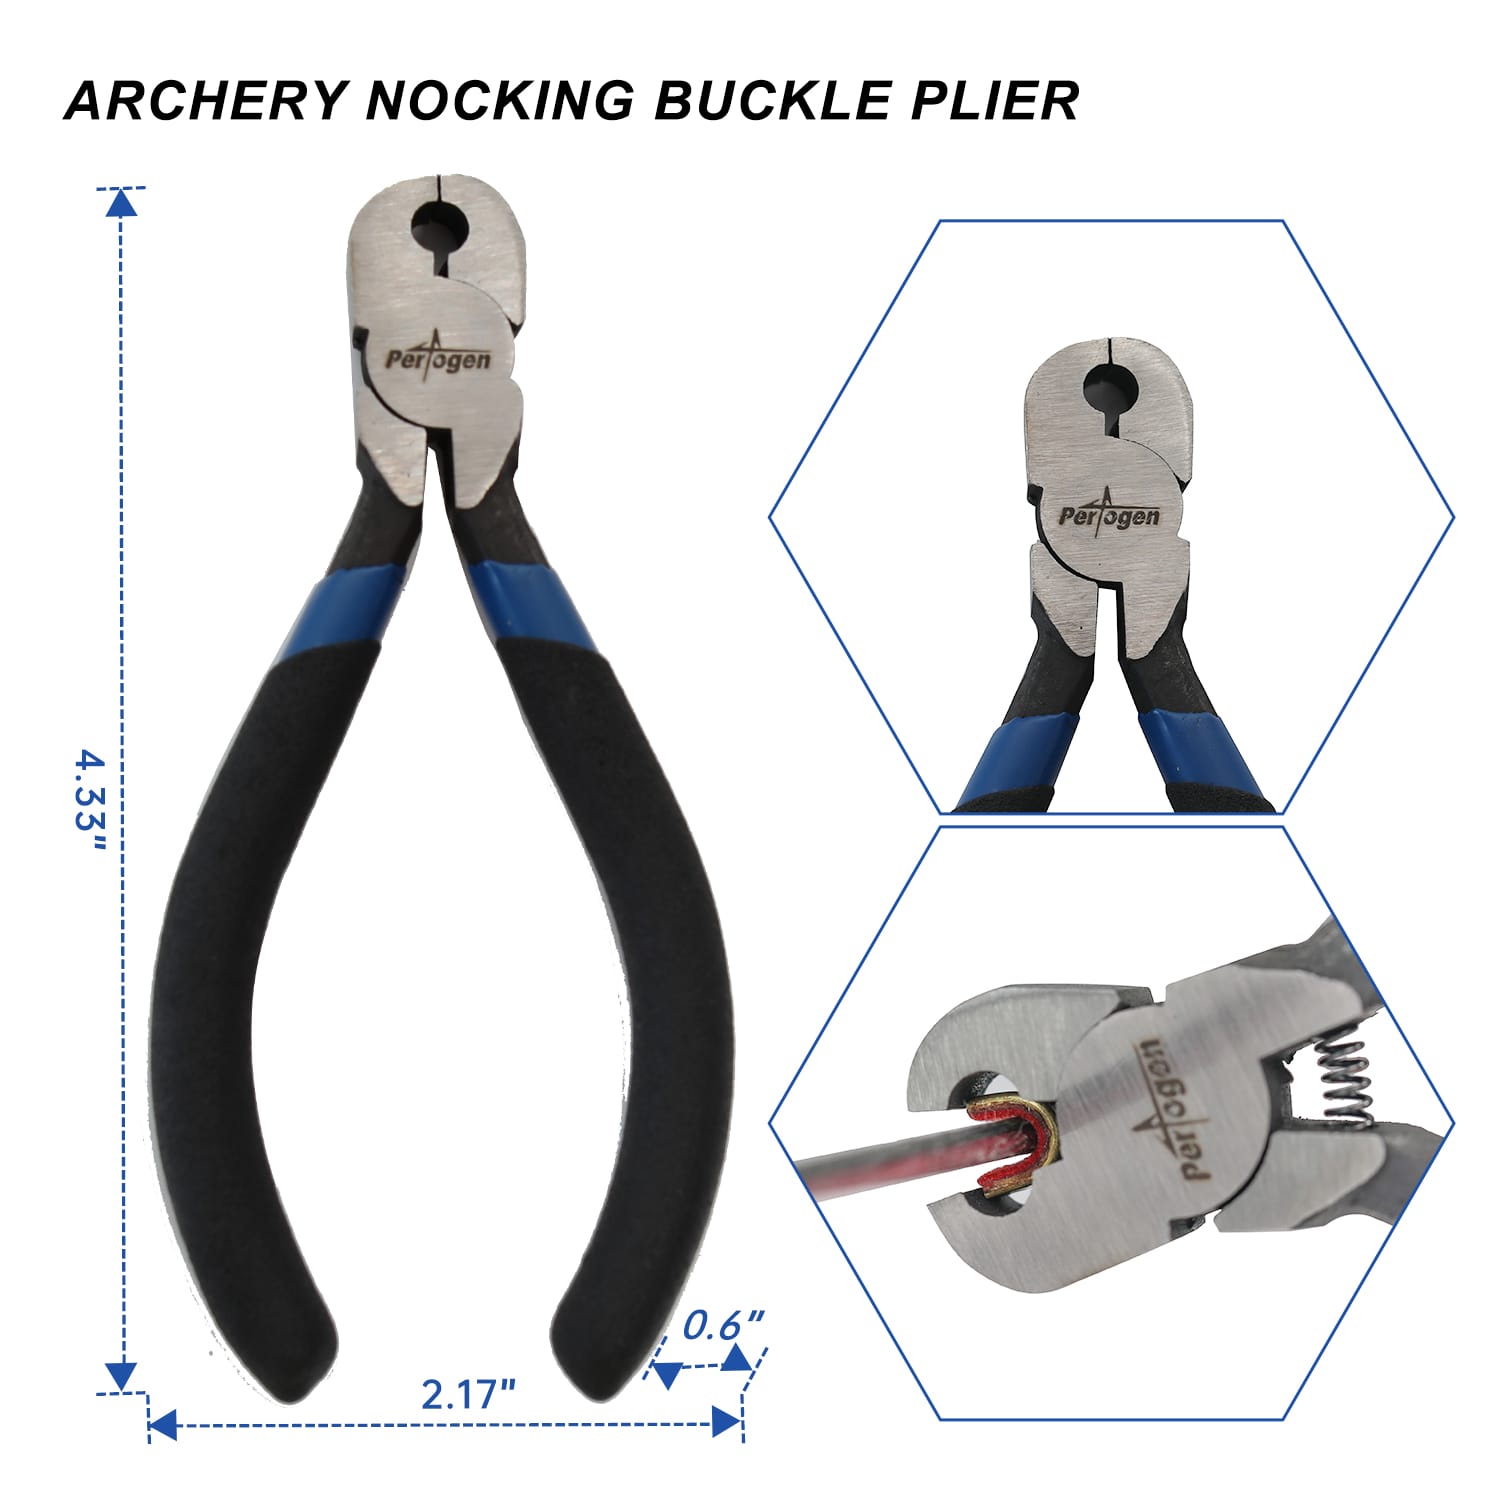 1 Archery Nocking Buckle Pliers with Points String Compound Recurve Bow Tool set 